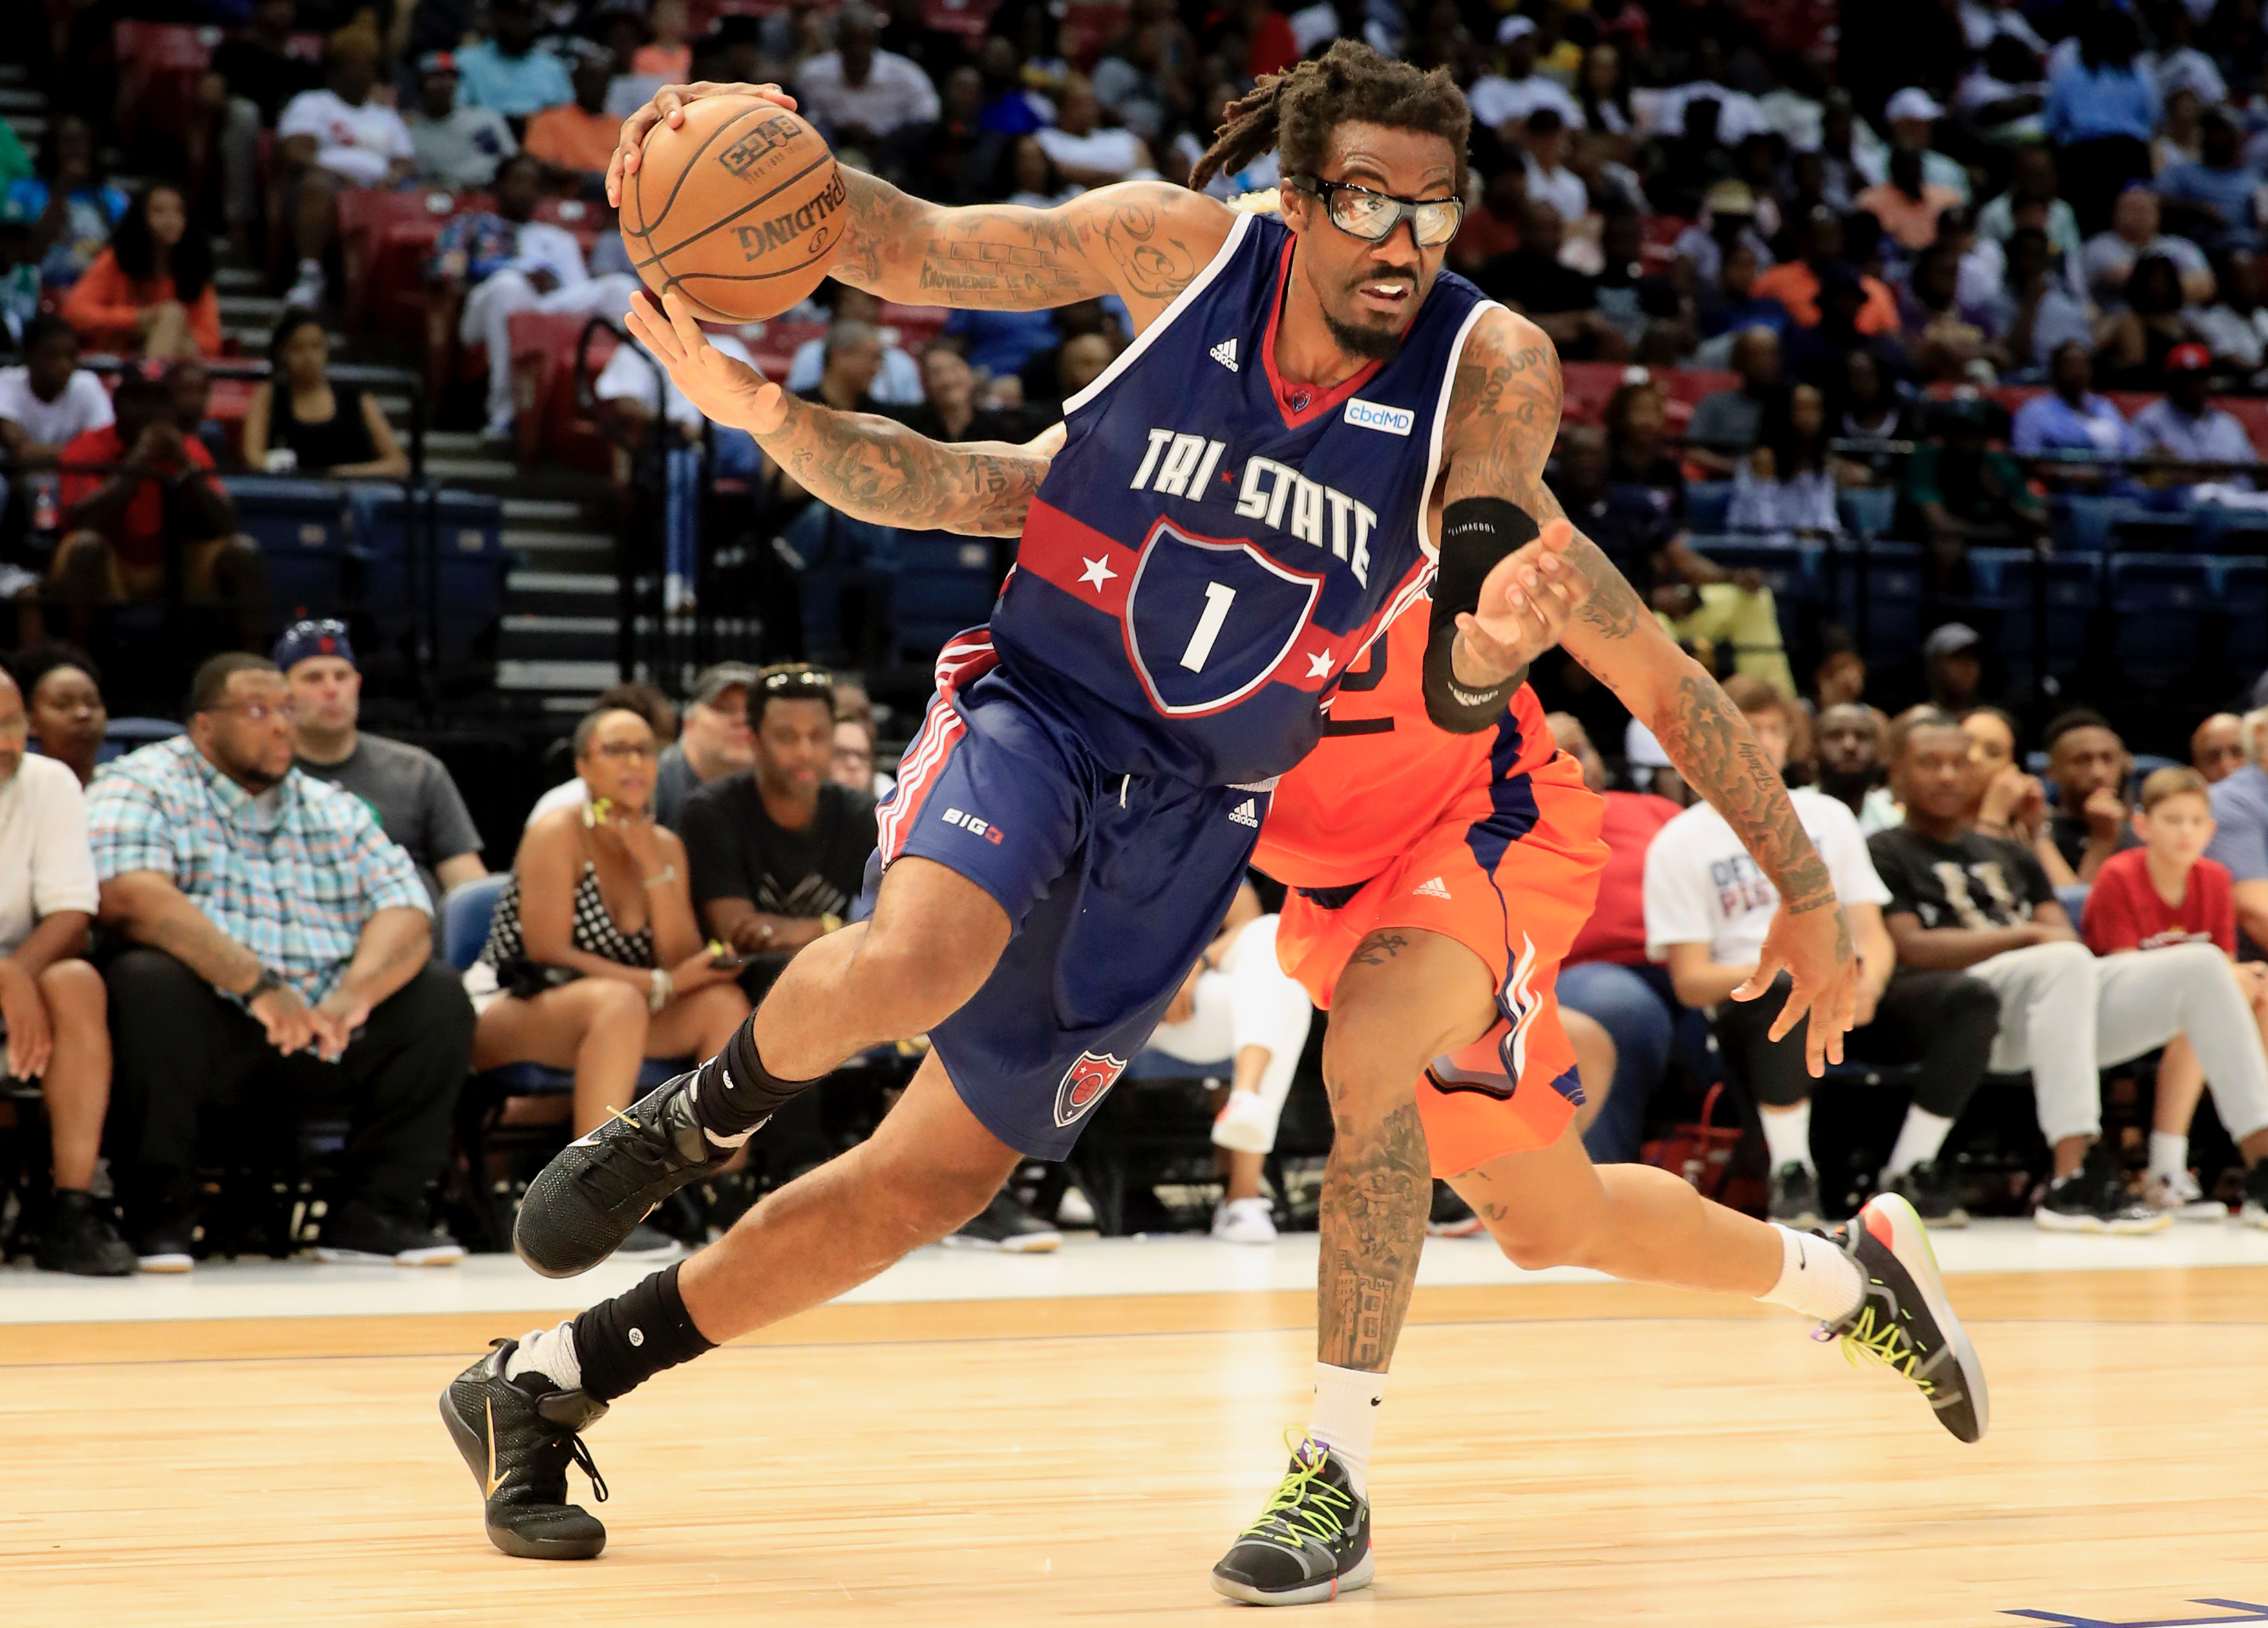 BIG3 Basketball's Amar'e Stoudemire should be in NBA, Lakers interested